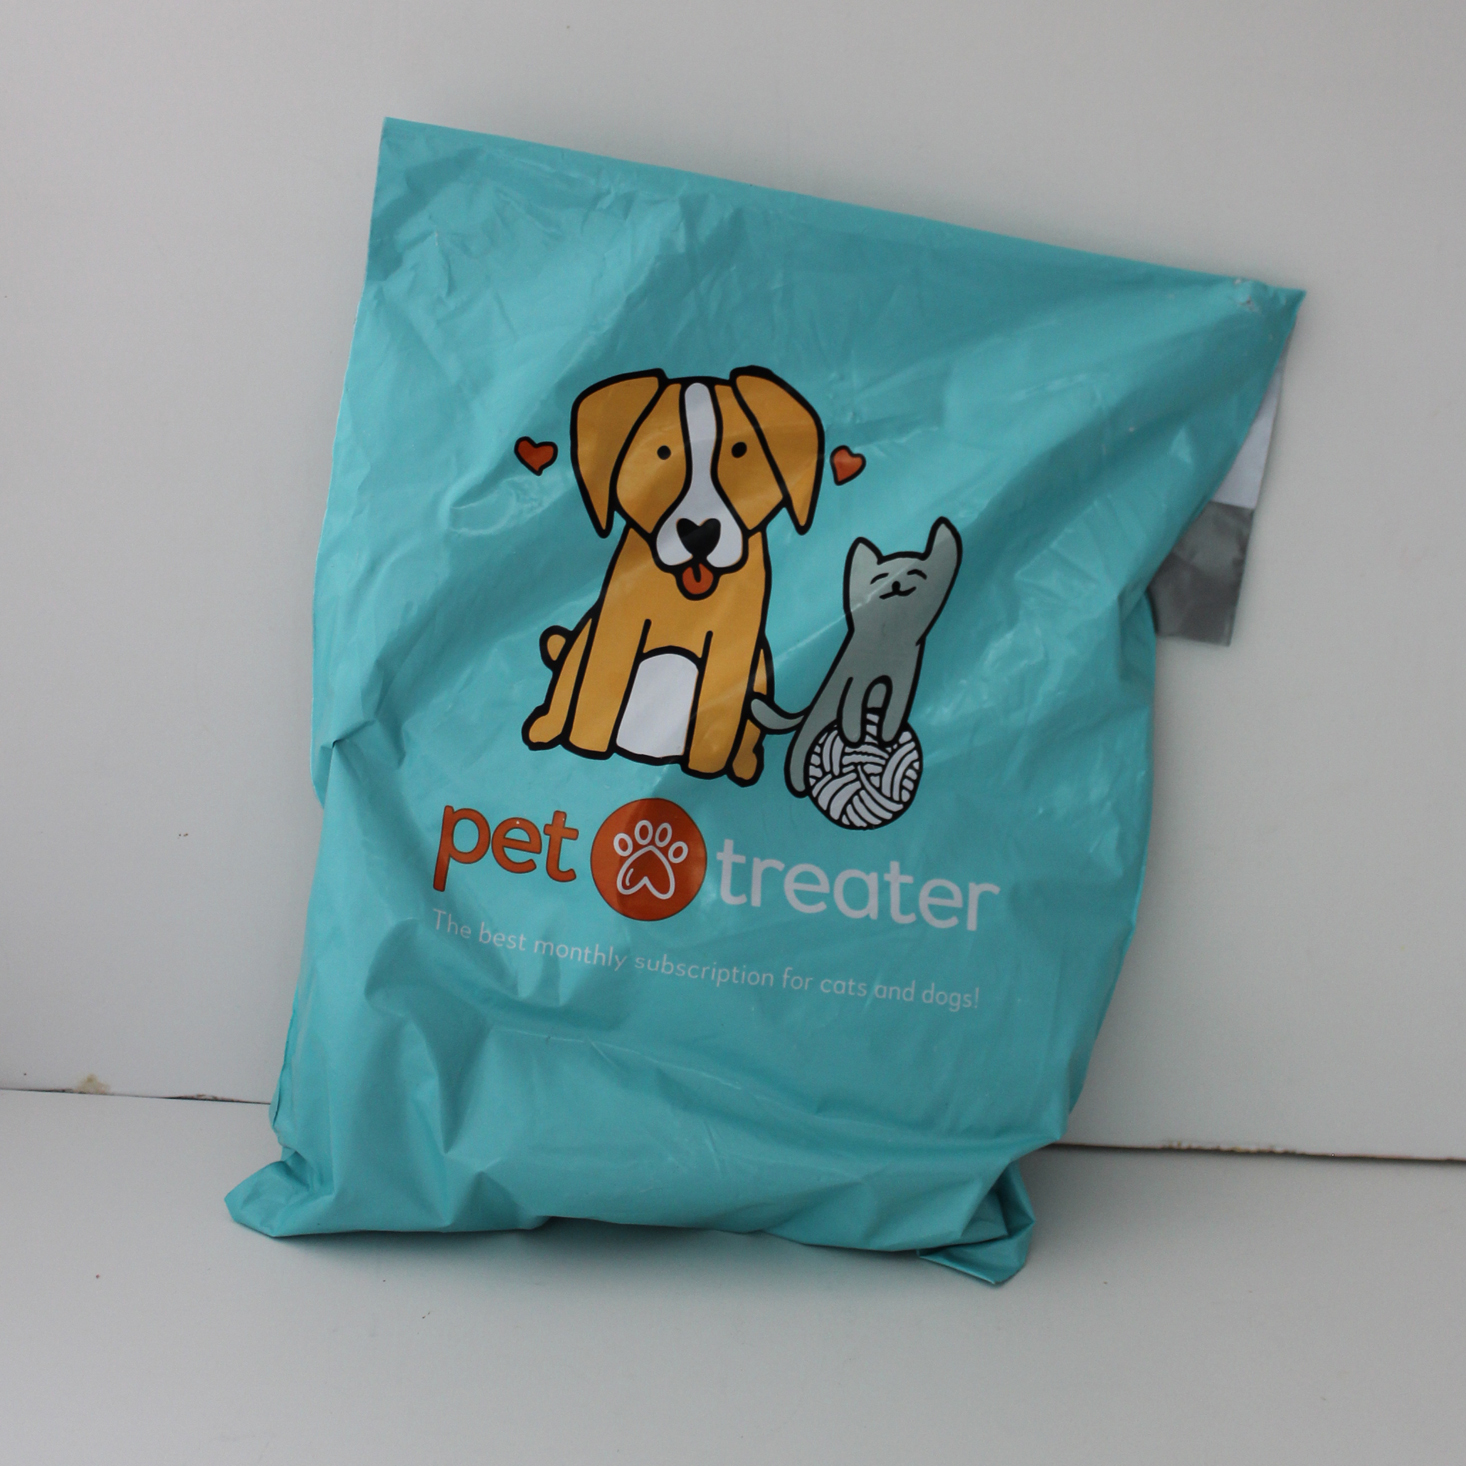 Pet Treater Cat Subscription Box Review + Coupon – July 2019